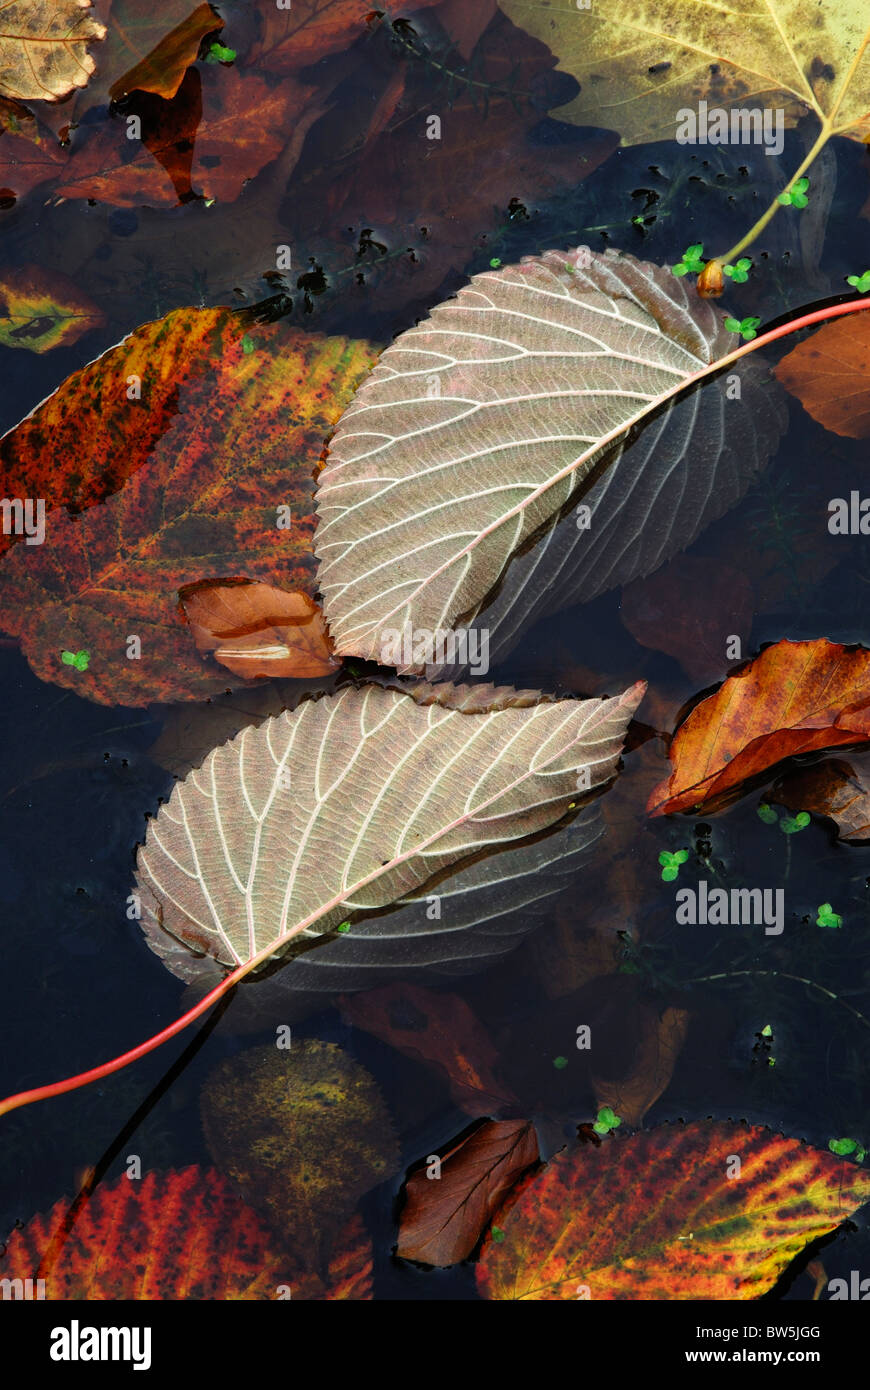 Deciduous leaves floating in pond in late autumn. Dorset, UK November 2010 Stock Photo